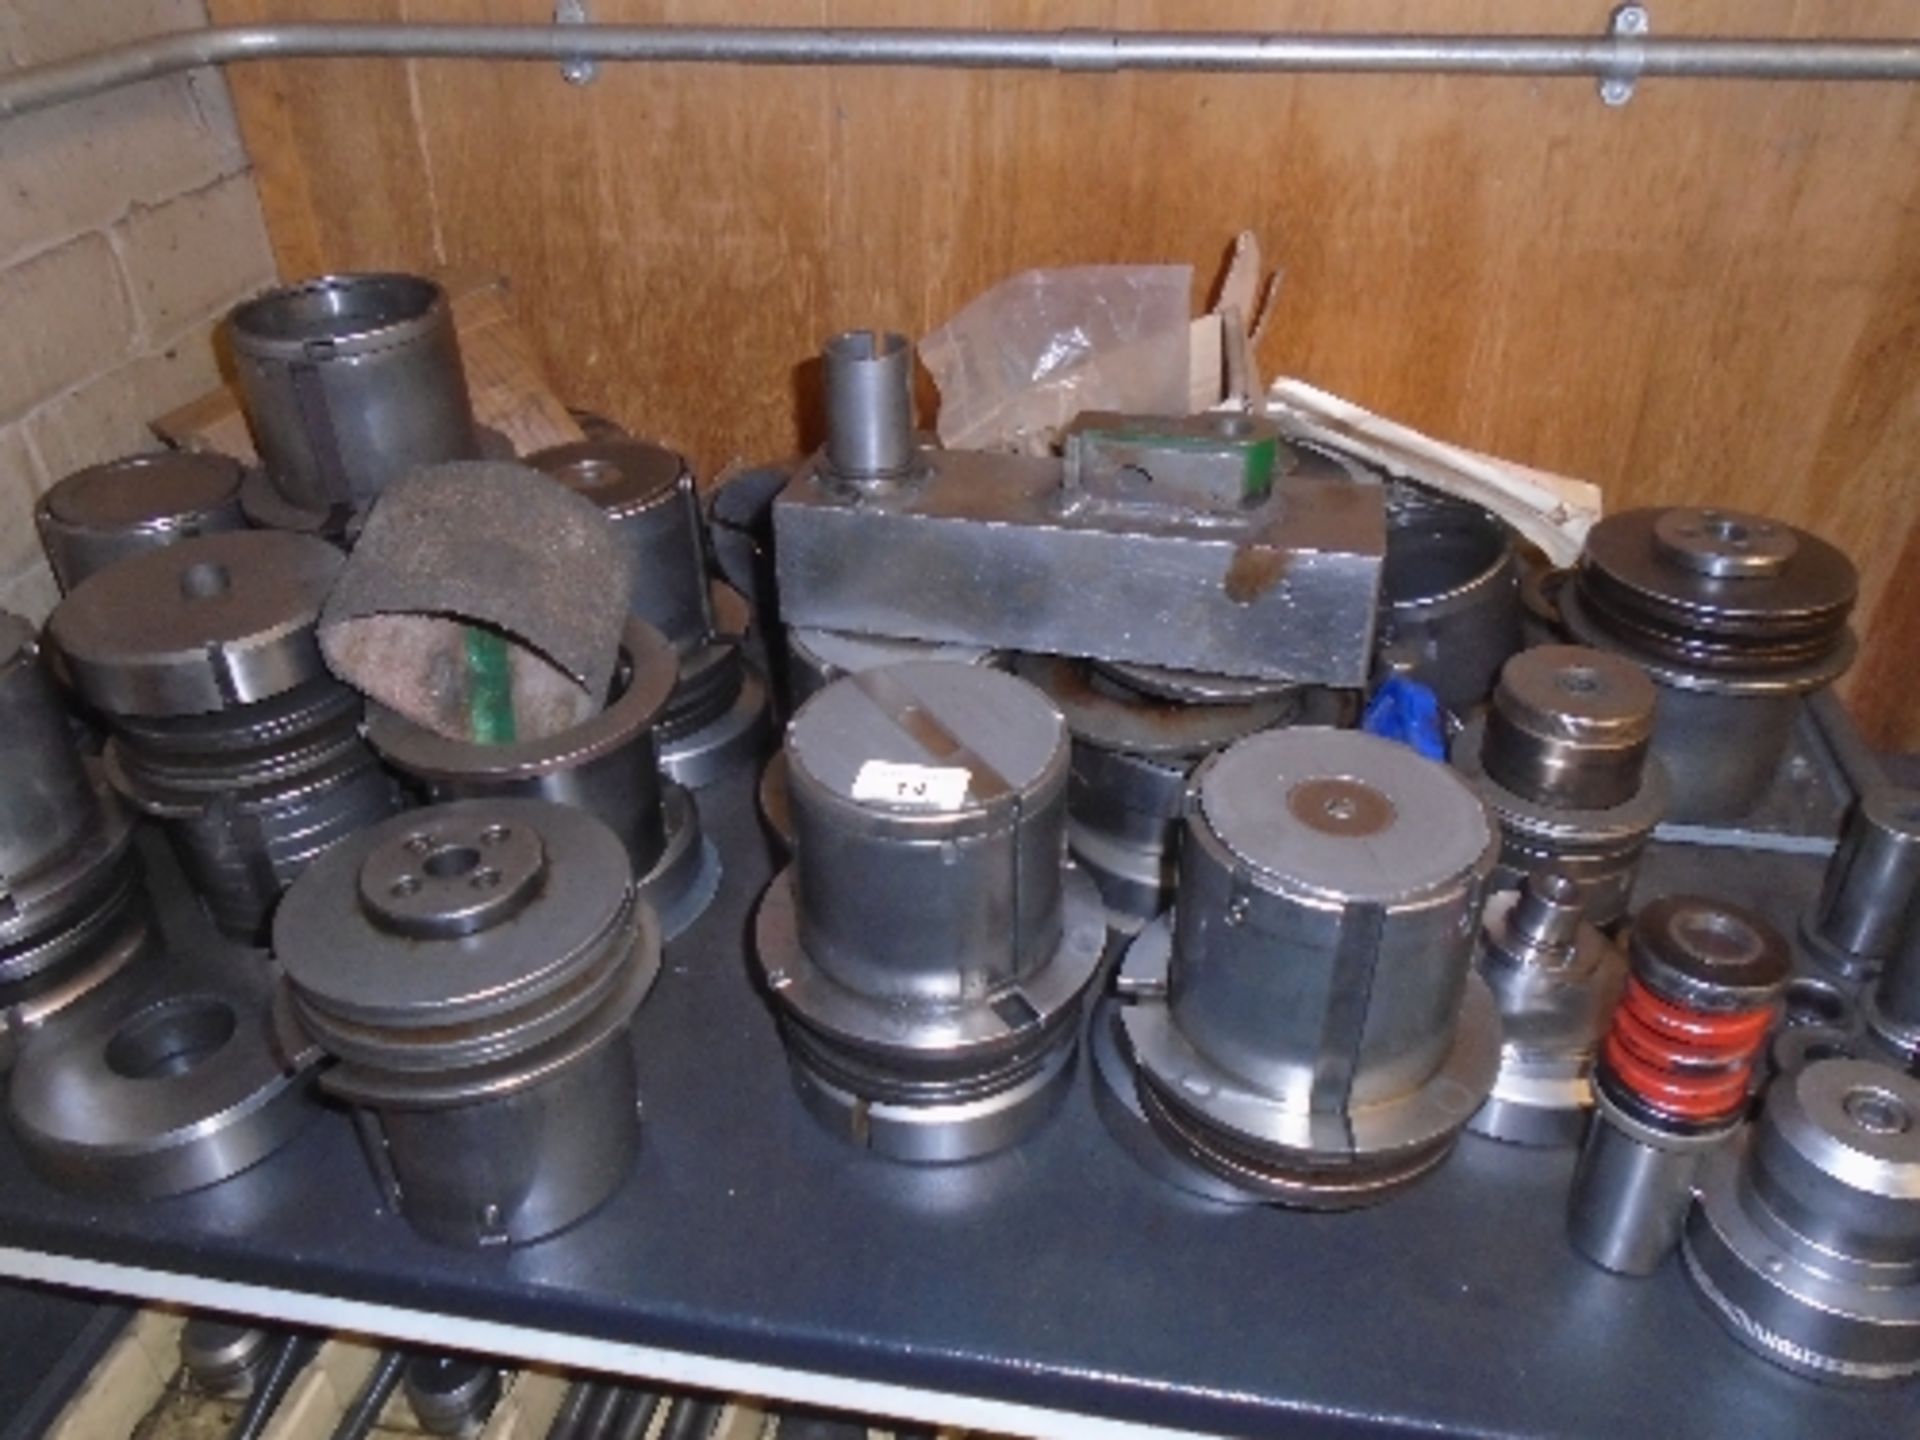 Contents to top of metal cabinet - quantity of assorted metal press die cutters